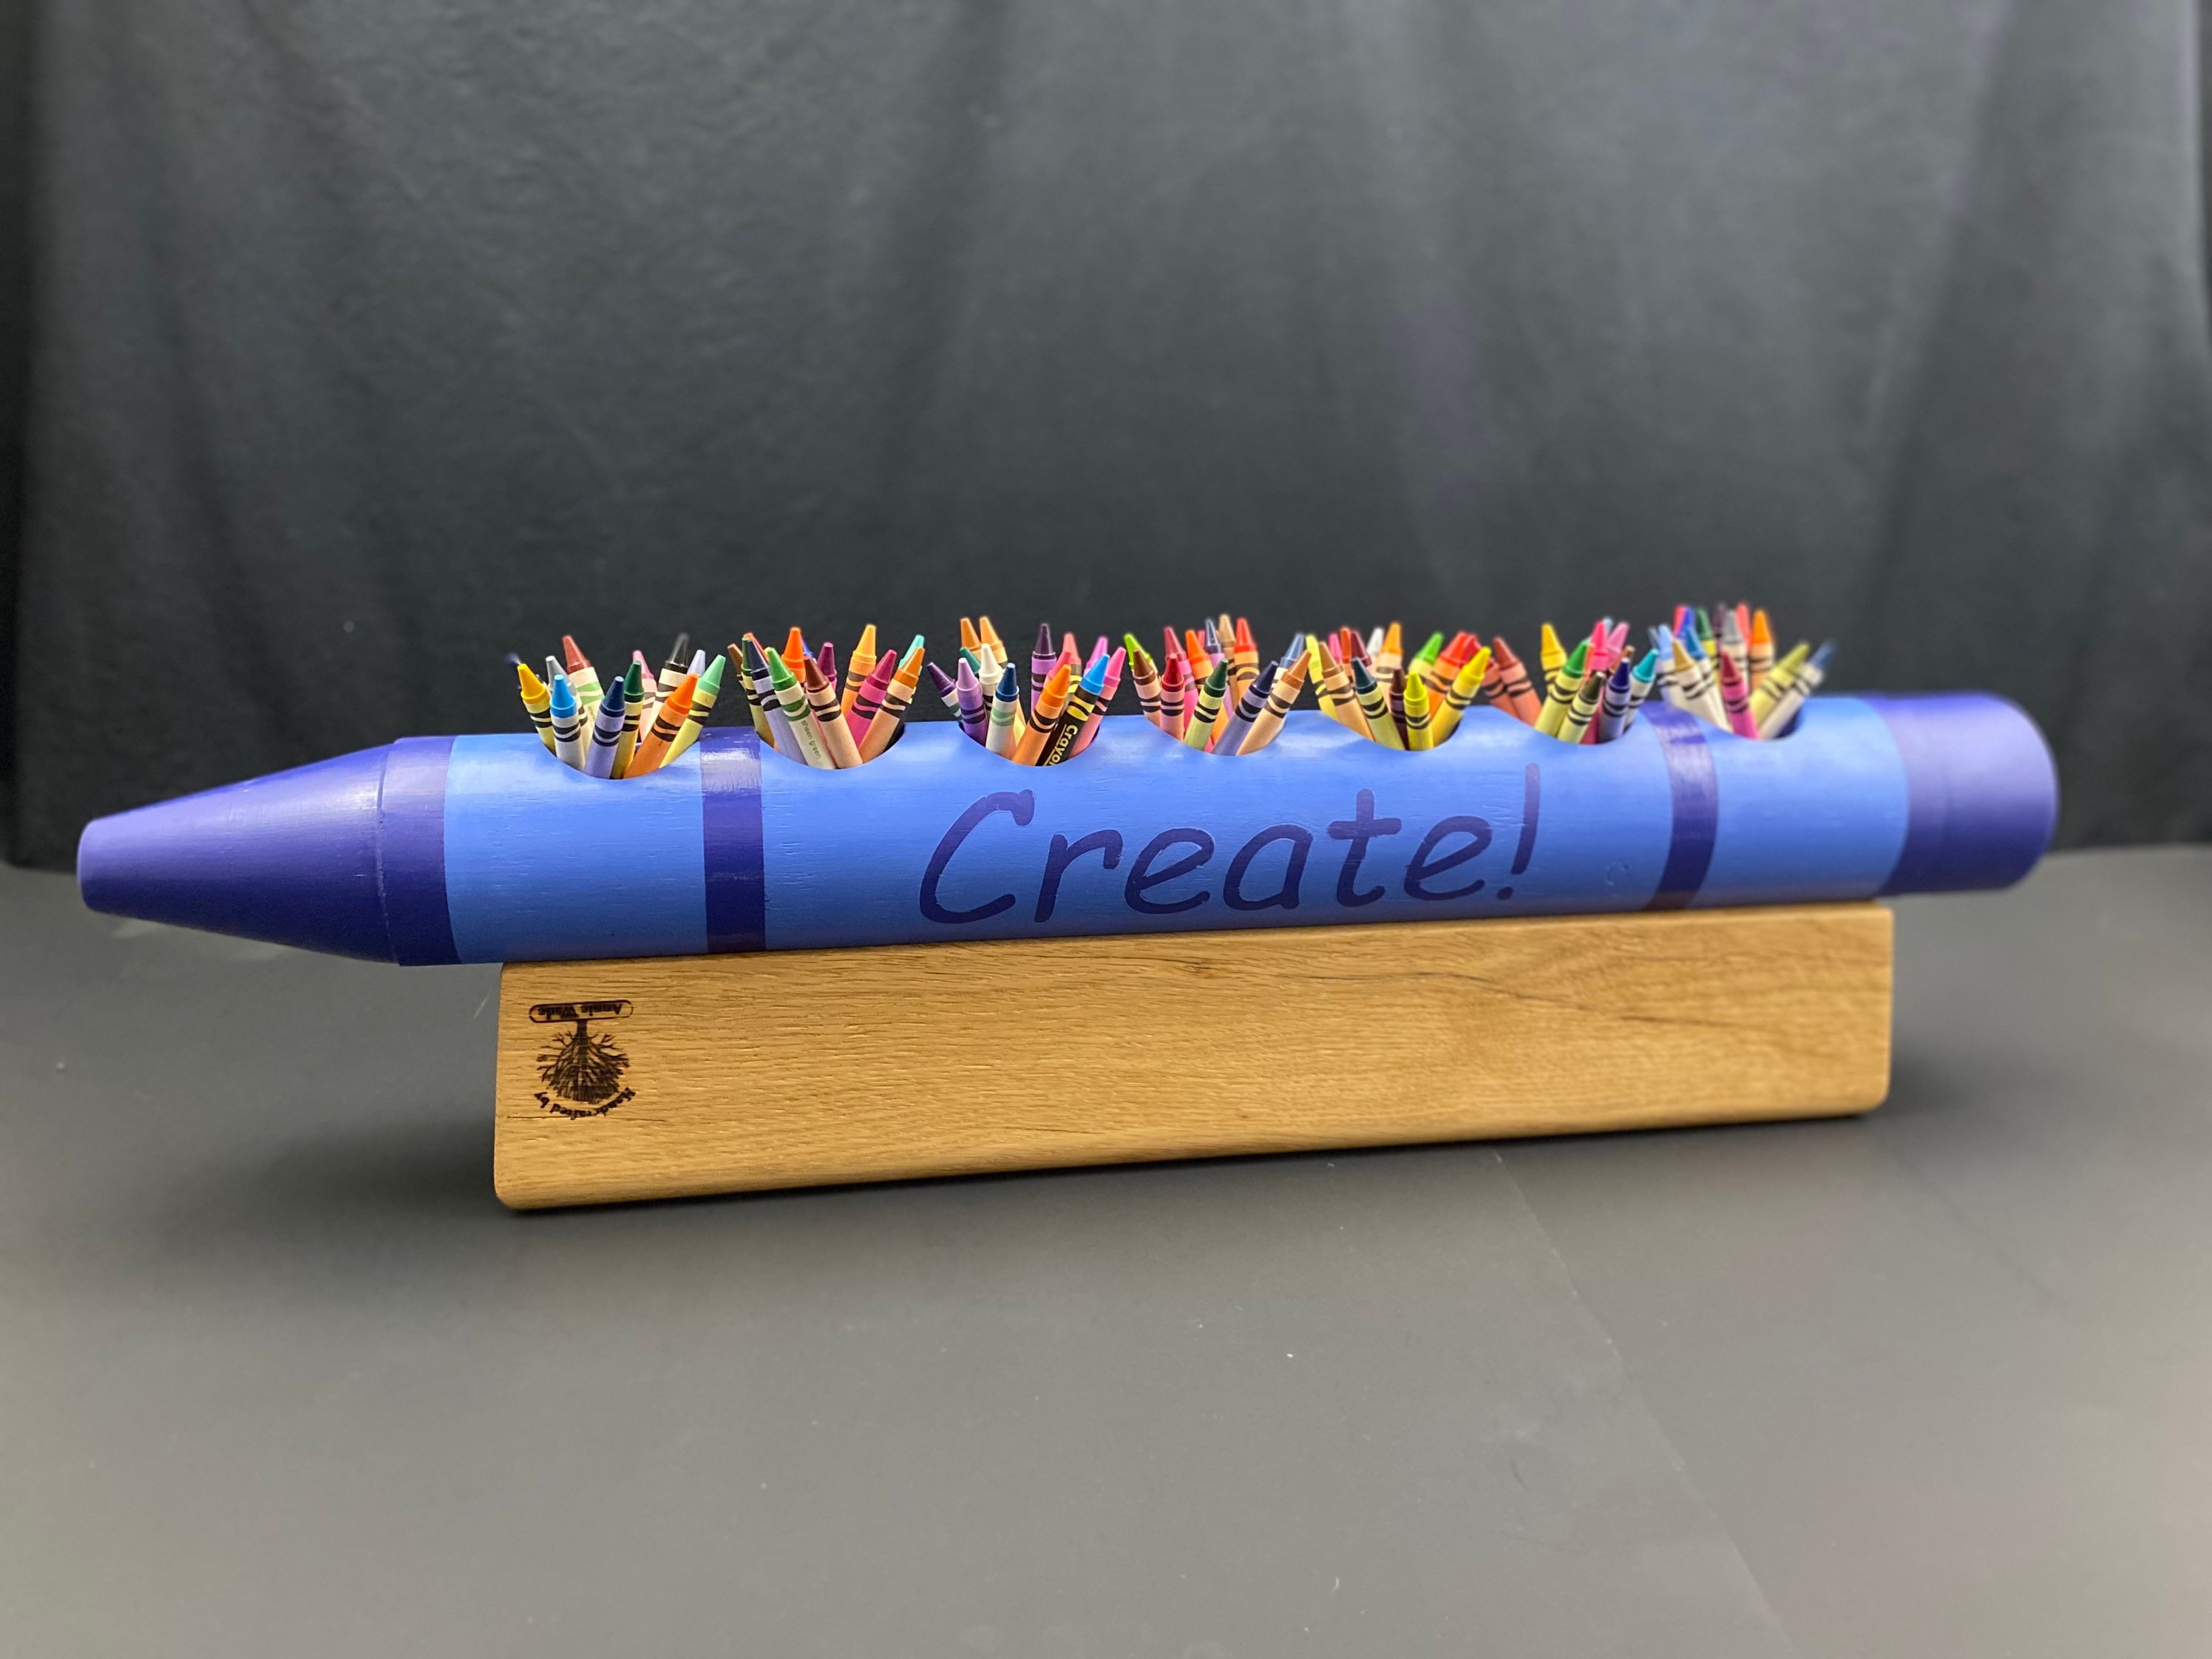 CraCycle DIY 4 Giant Crayons, Craft Project, Gift Maker, 2 Silicone Molds &  Complete Accessories to Make 4 Giant Crayons in a Giant Crayon Box